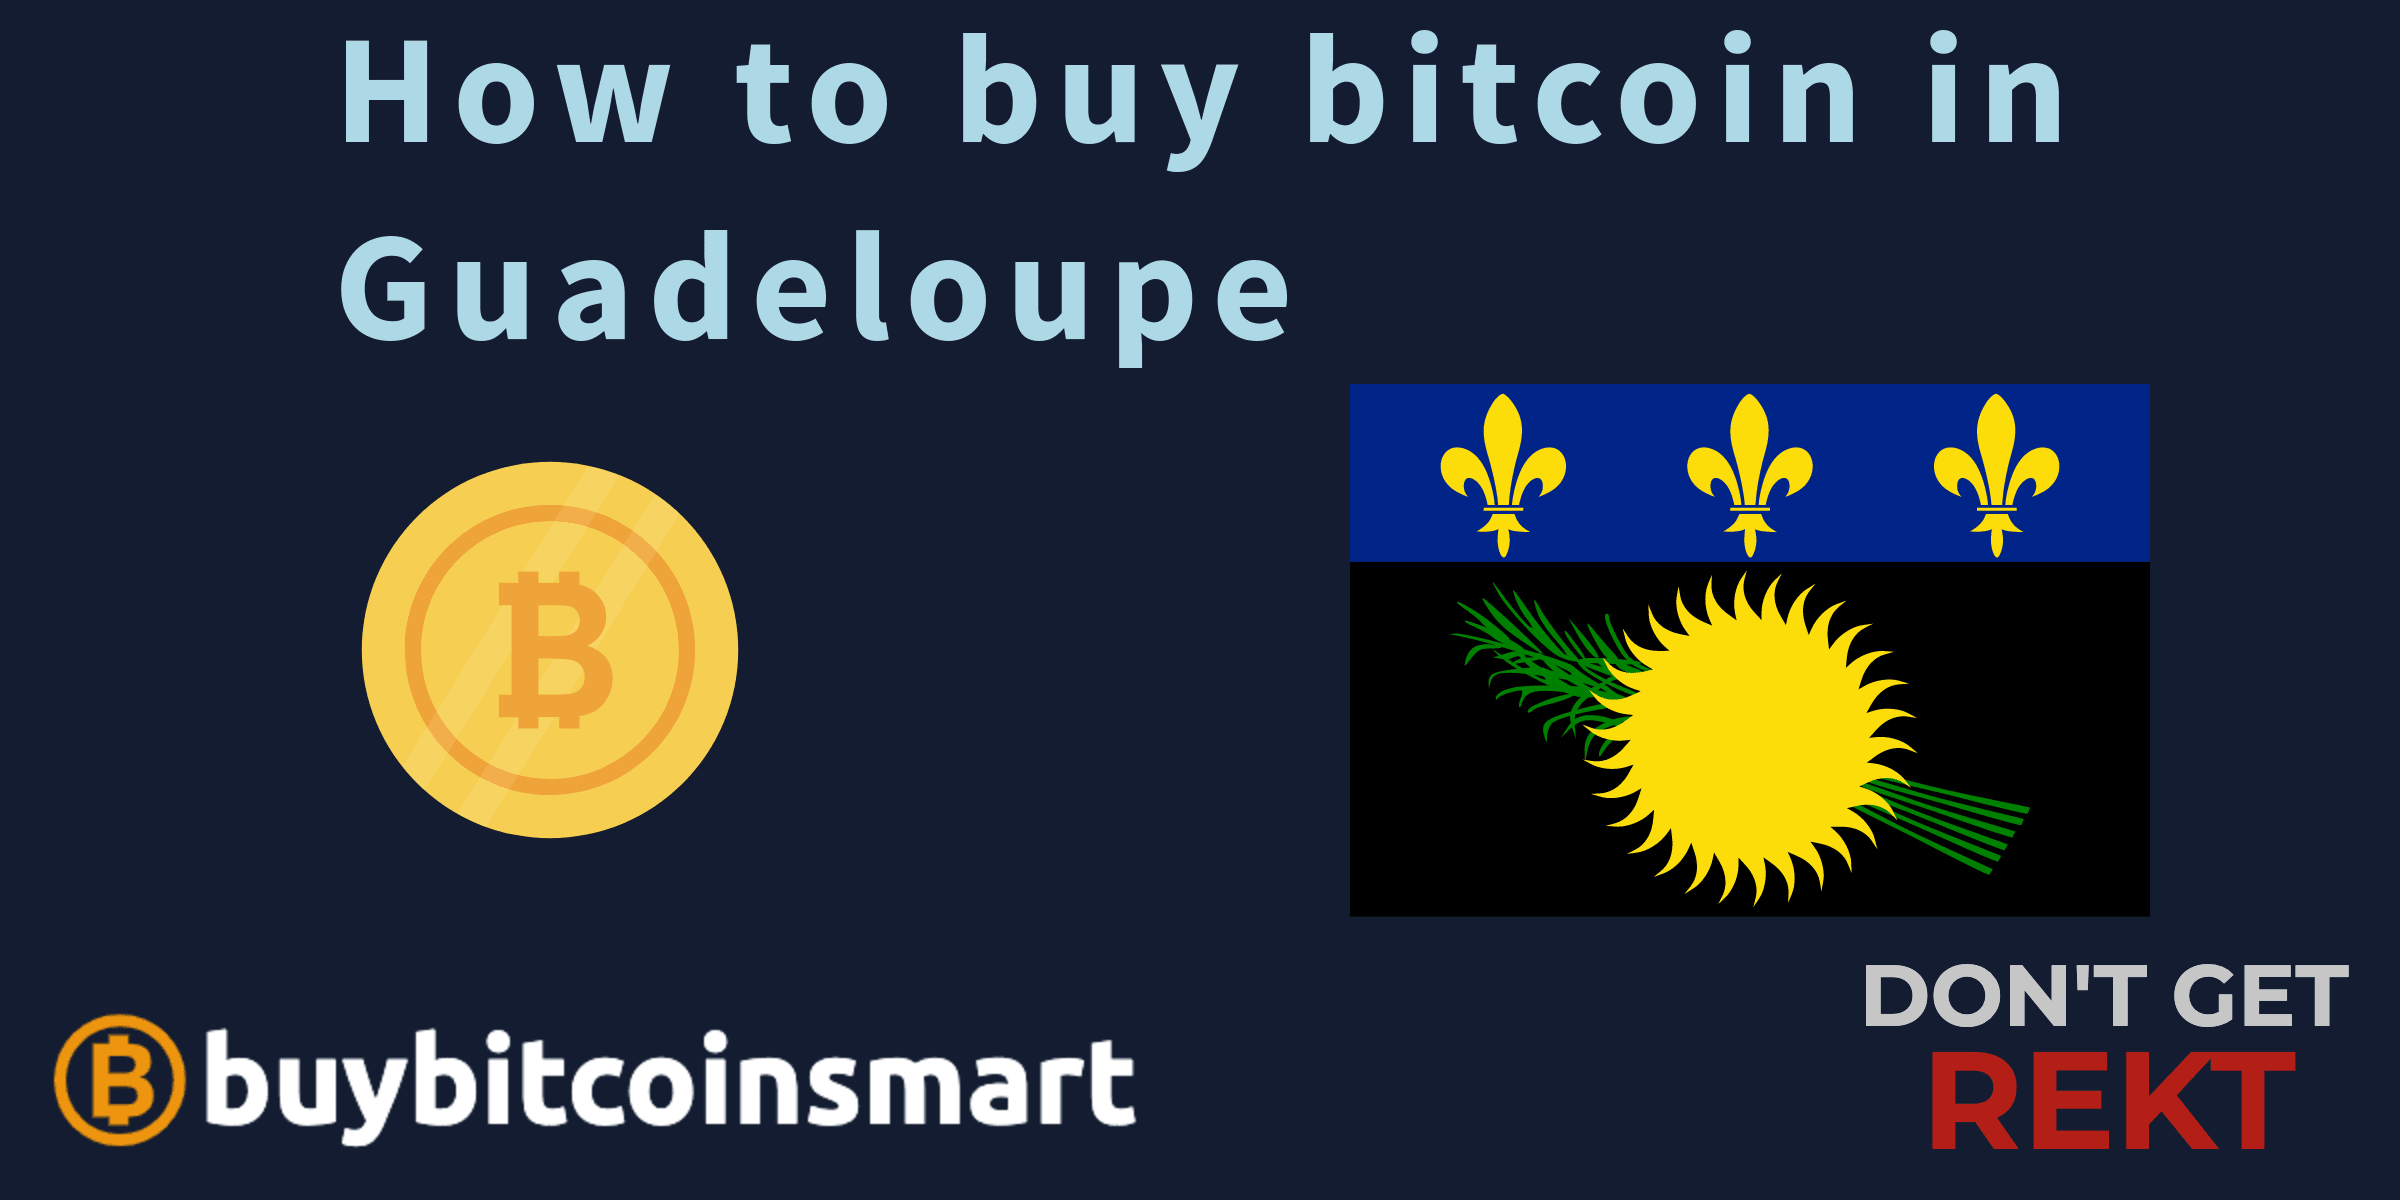 How to buy bitcoin in Guadeloupe